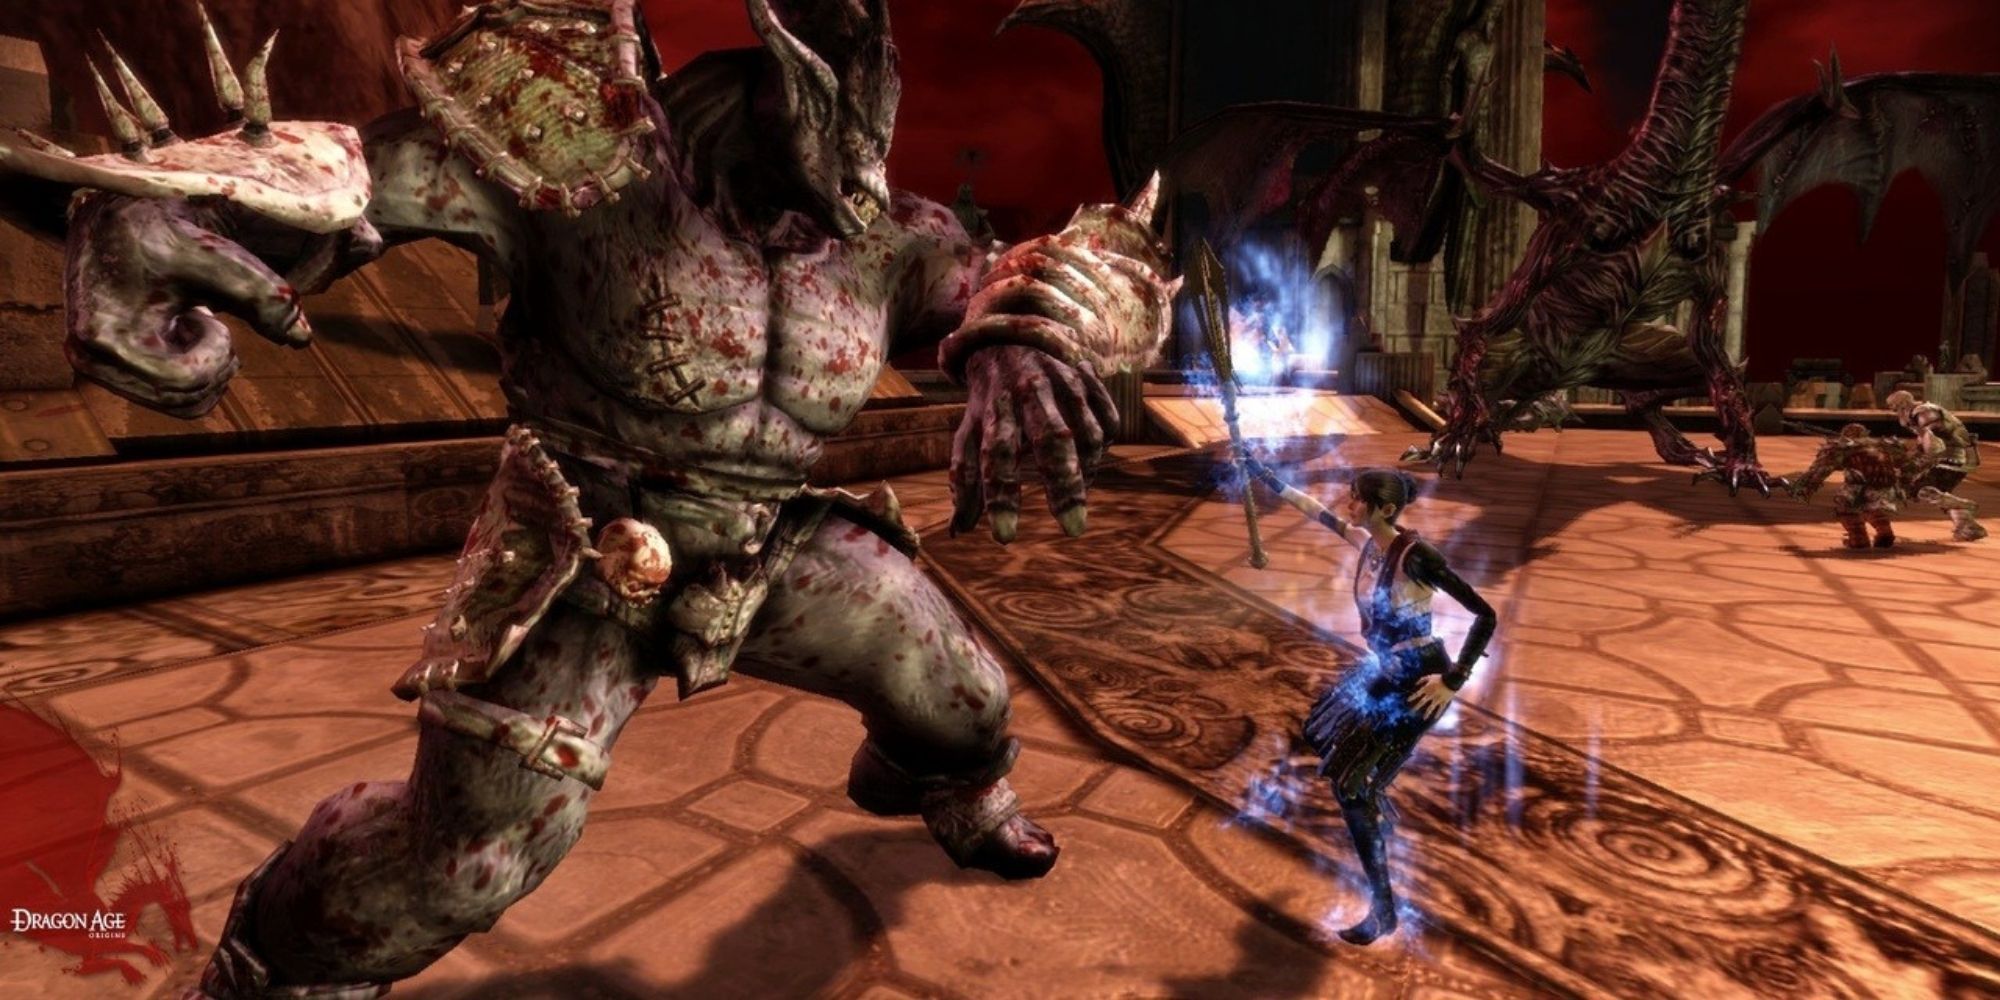 Interview How You Almost Never Played Dragon Age On Console